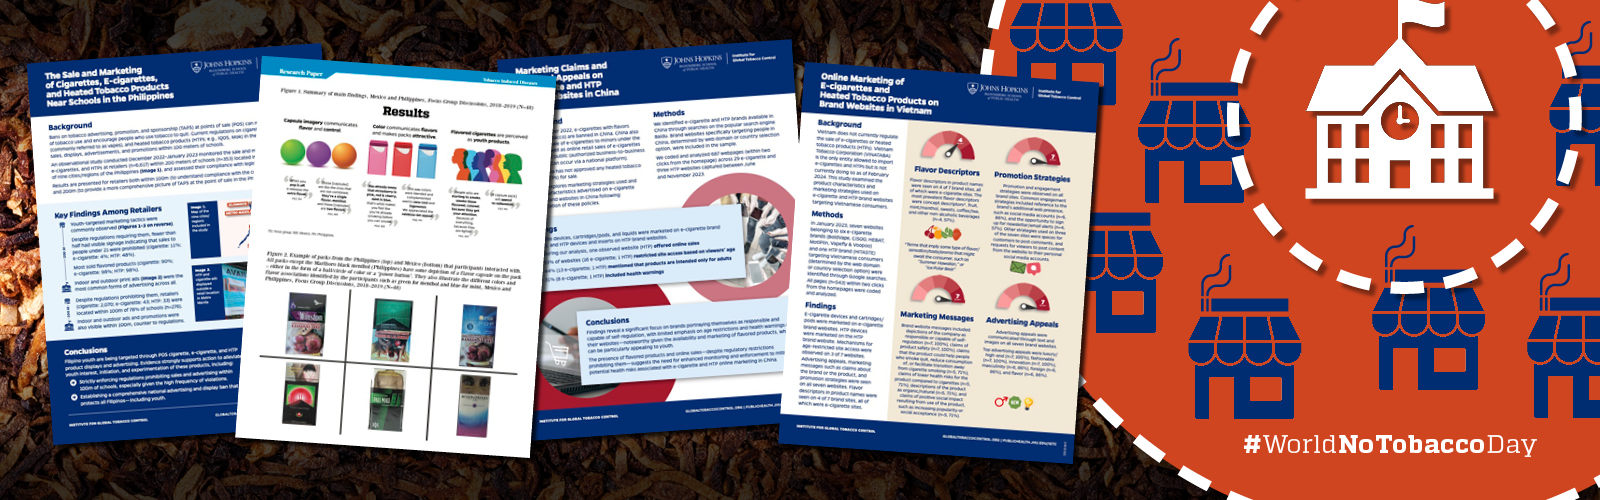 Collage of photos, fact sheets, and publications assessing tobacco industry tactics targeting youth. In the background is an orange target symbol with icons of cigarette stores surrounding a school.